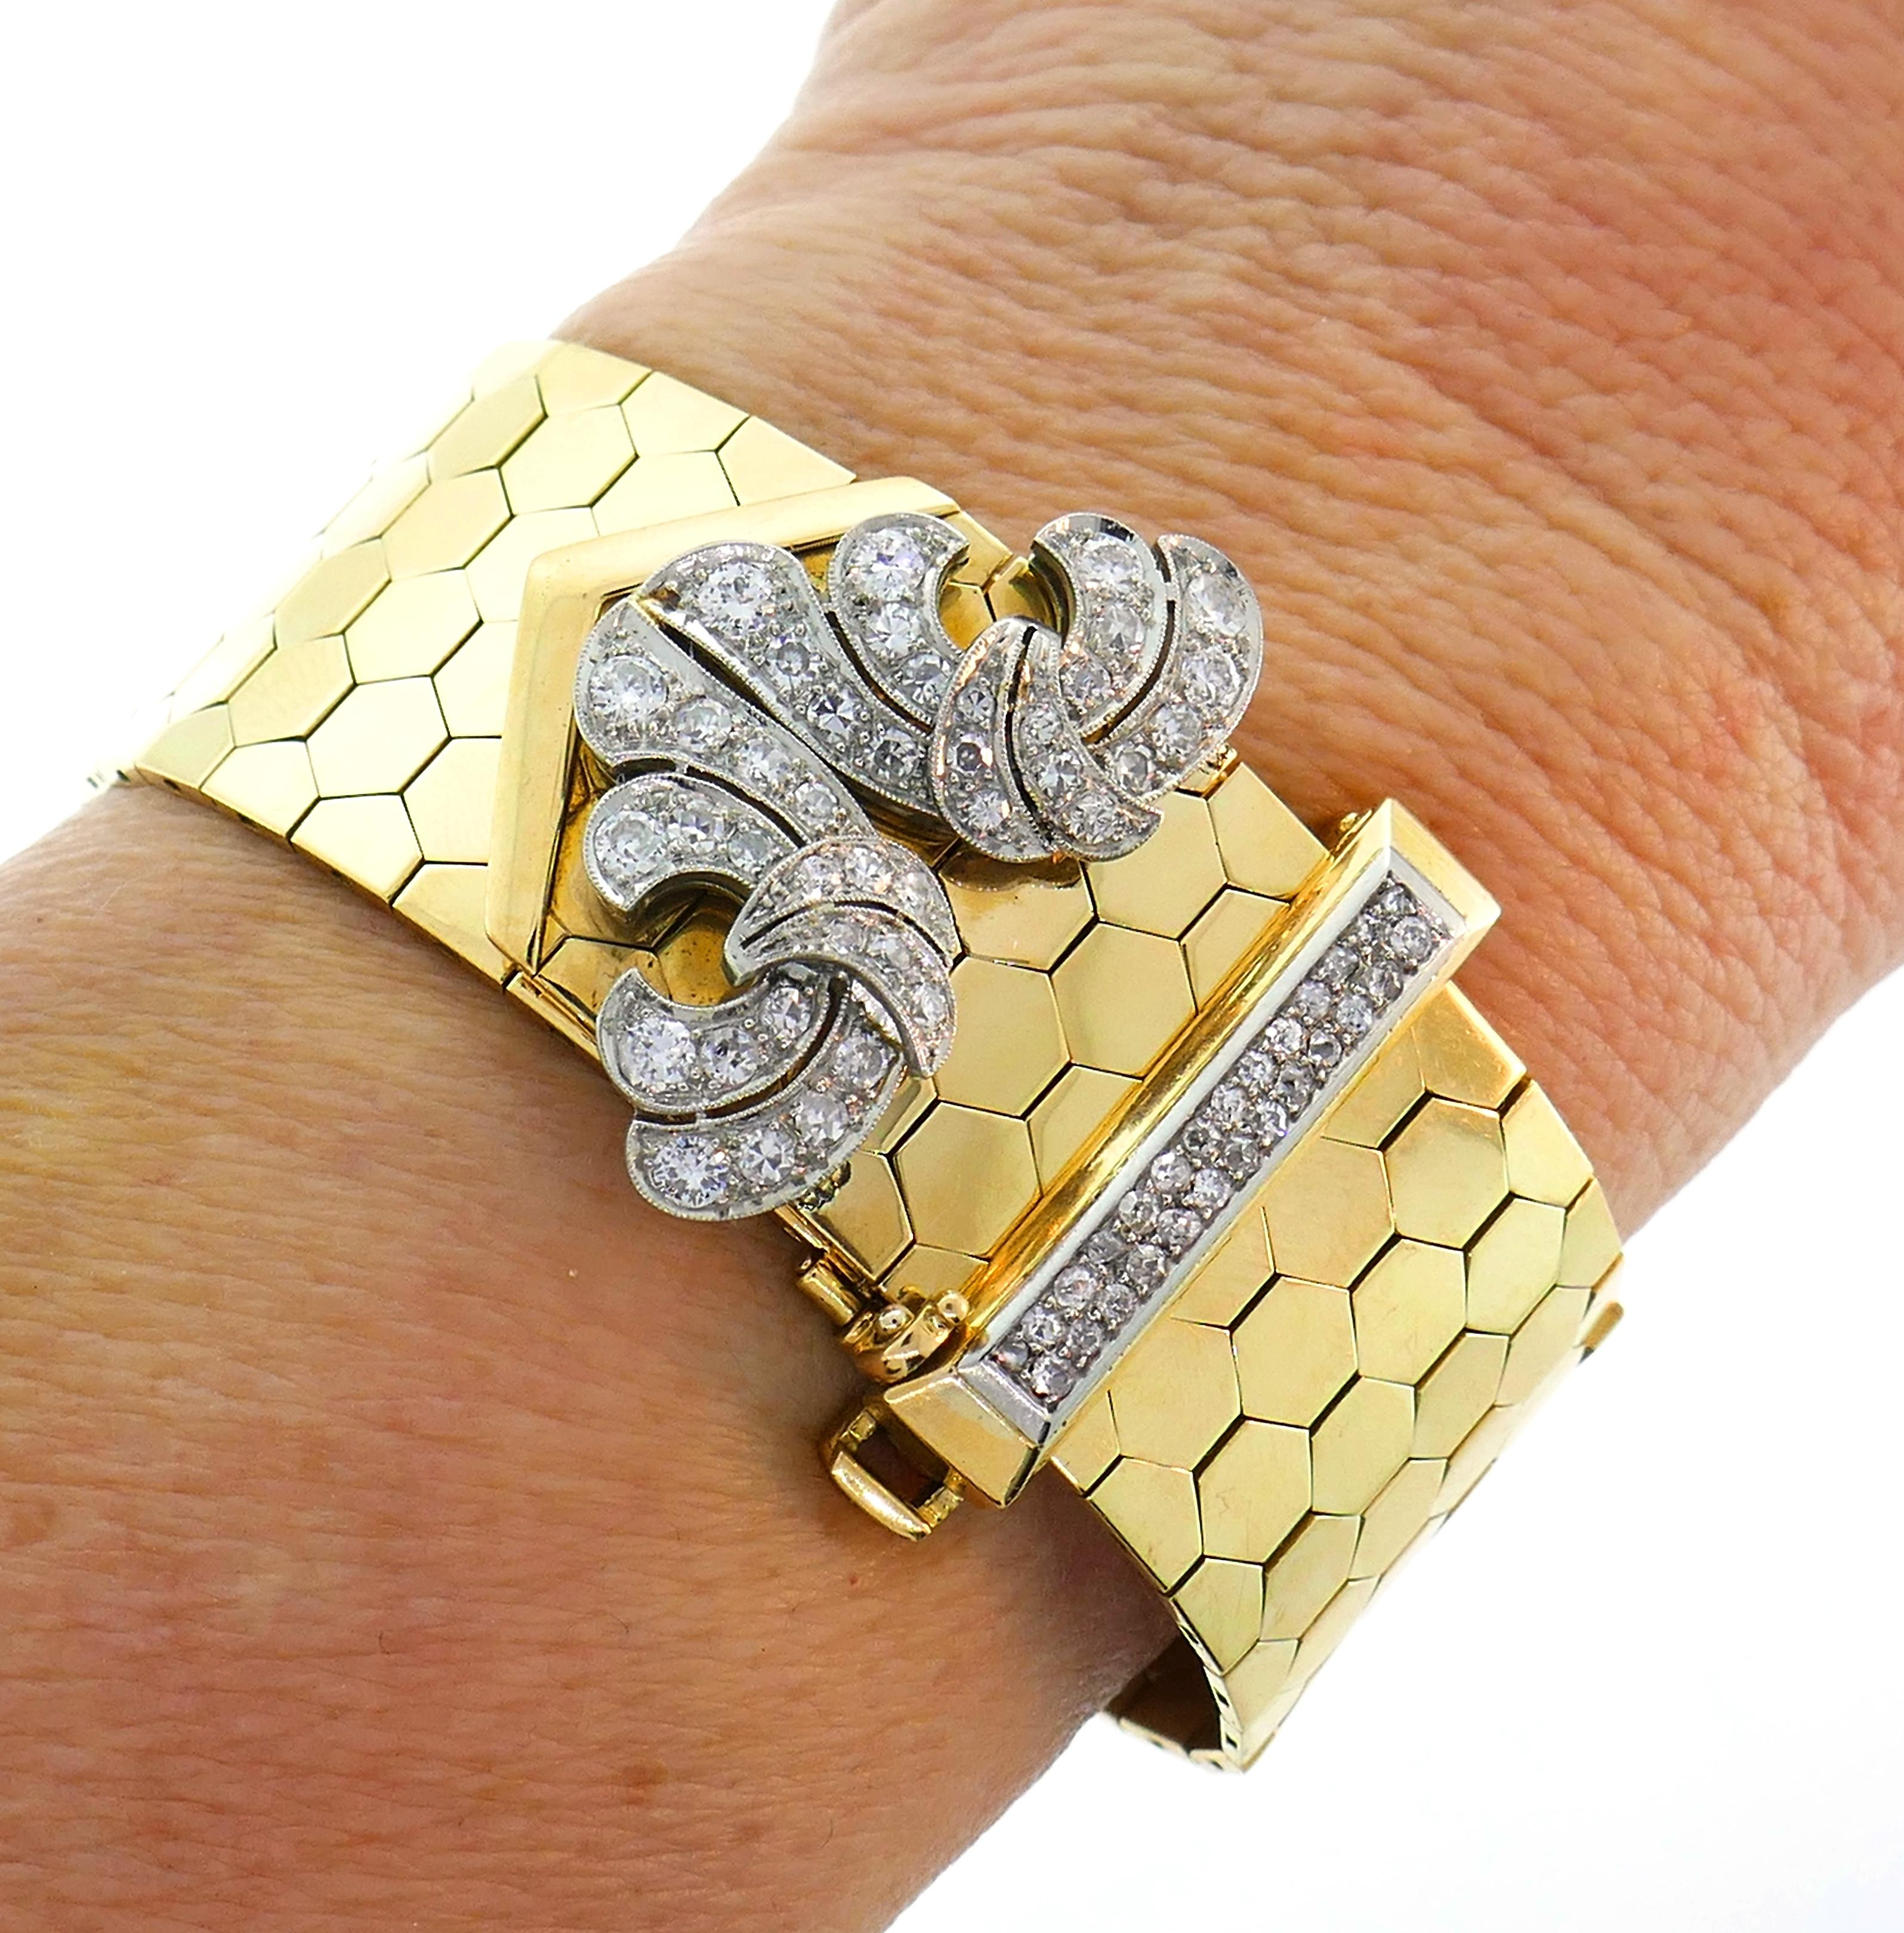 Stunning historic retro bracelet created by Van Cleef & Arpels in France in the 1940s. First entered Van Cleef & Arpels’ Collections in 1935, it was an immediate success and remained in production until around 1950. Its name is a reference to Louis